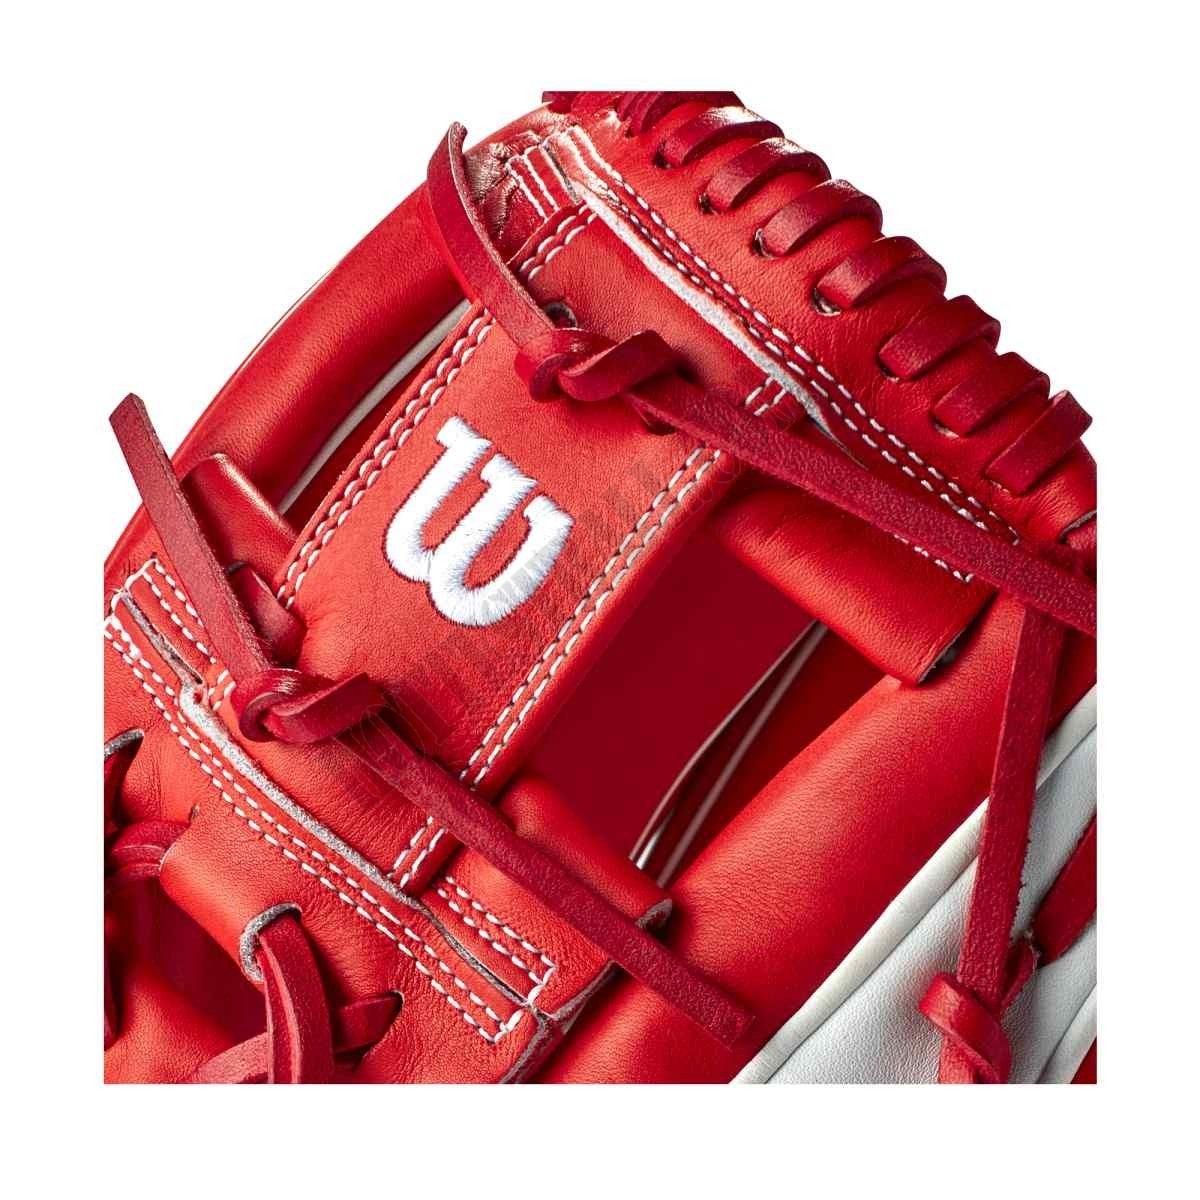 2021 A2000 1786 Canada 11.5" Infield Baseball Glove - Limited Edition ● Wilson Promotions - -5